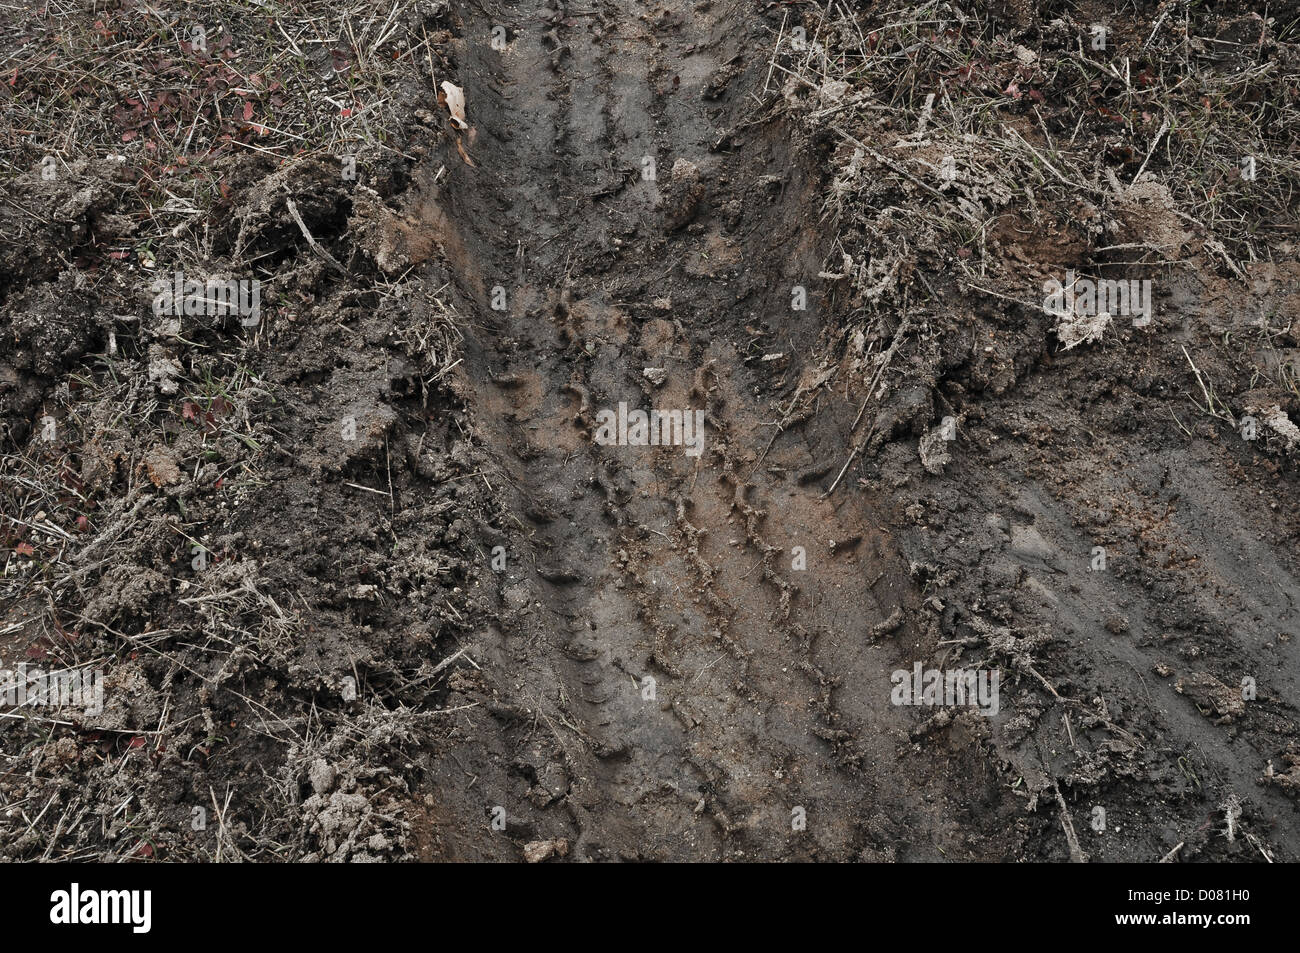 Single Truck Track in Mud that can be used as a background Stock Photo